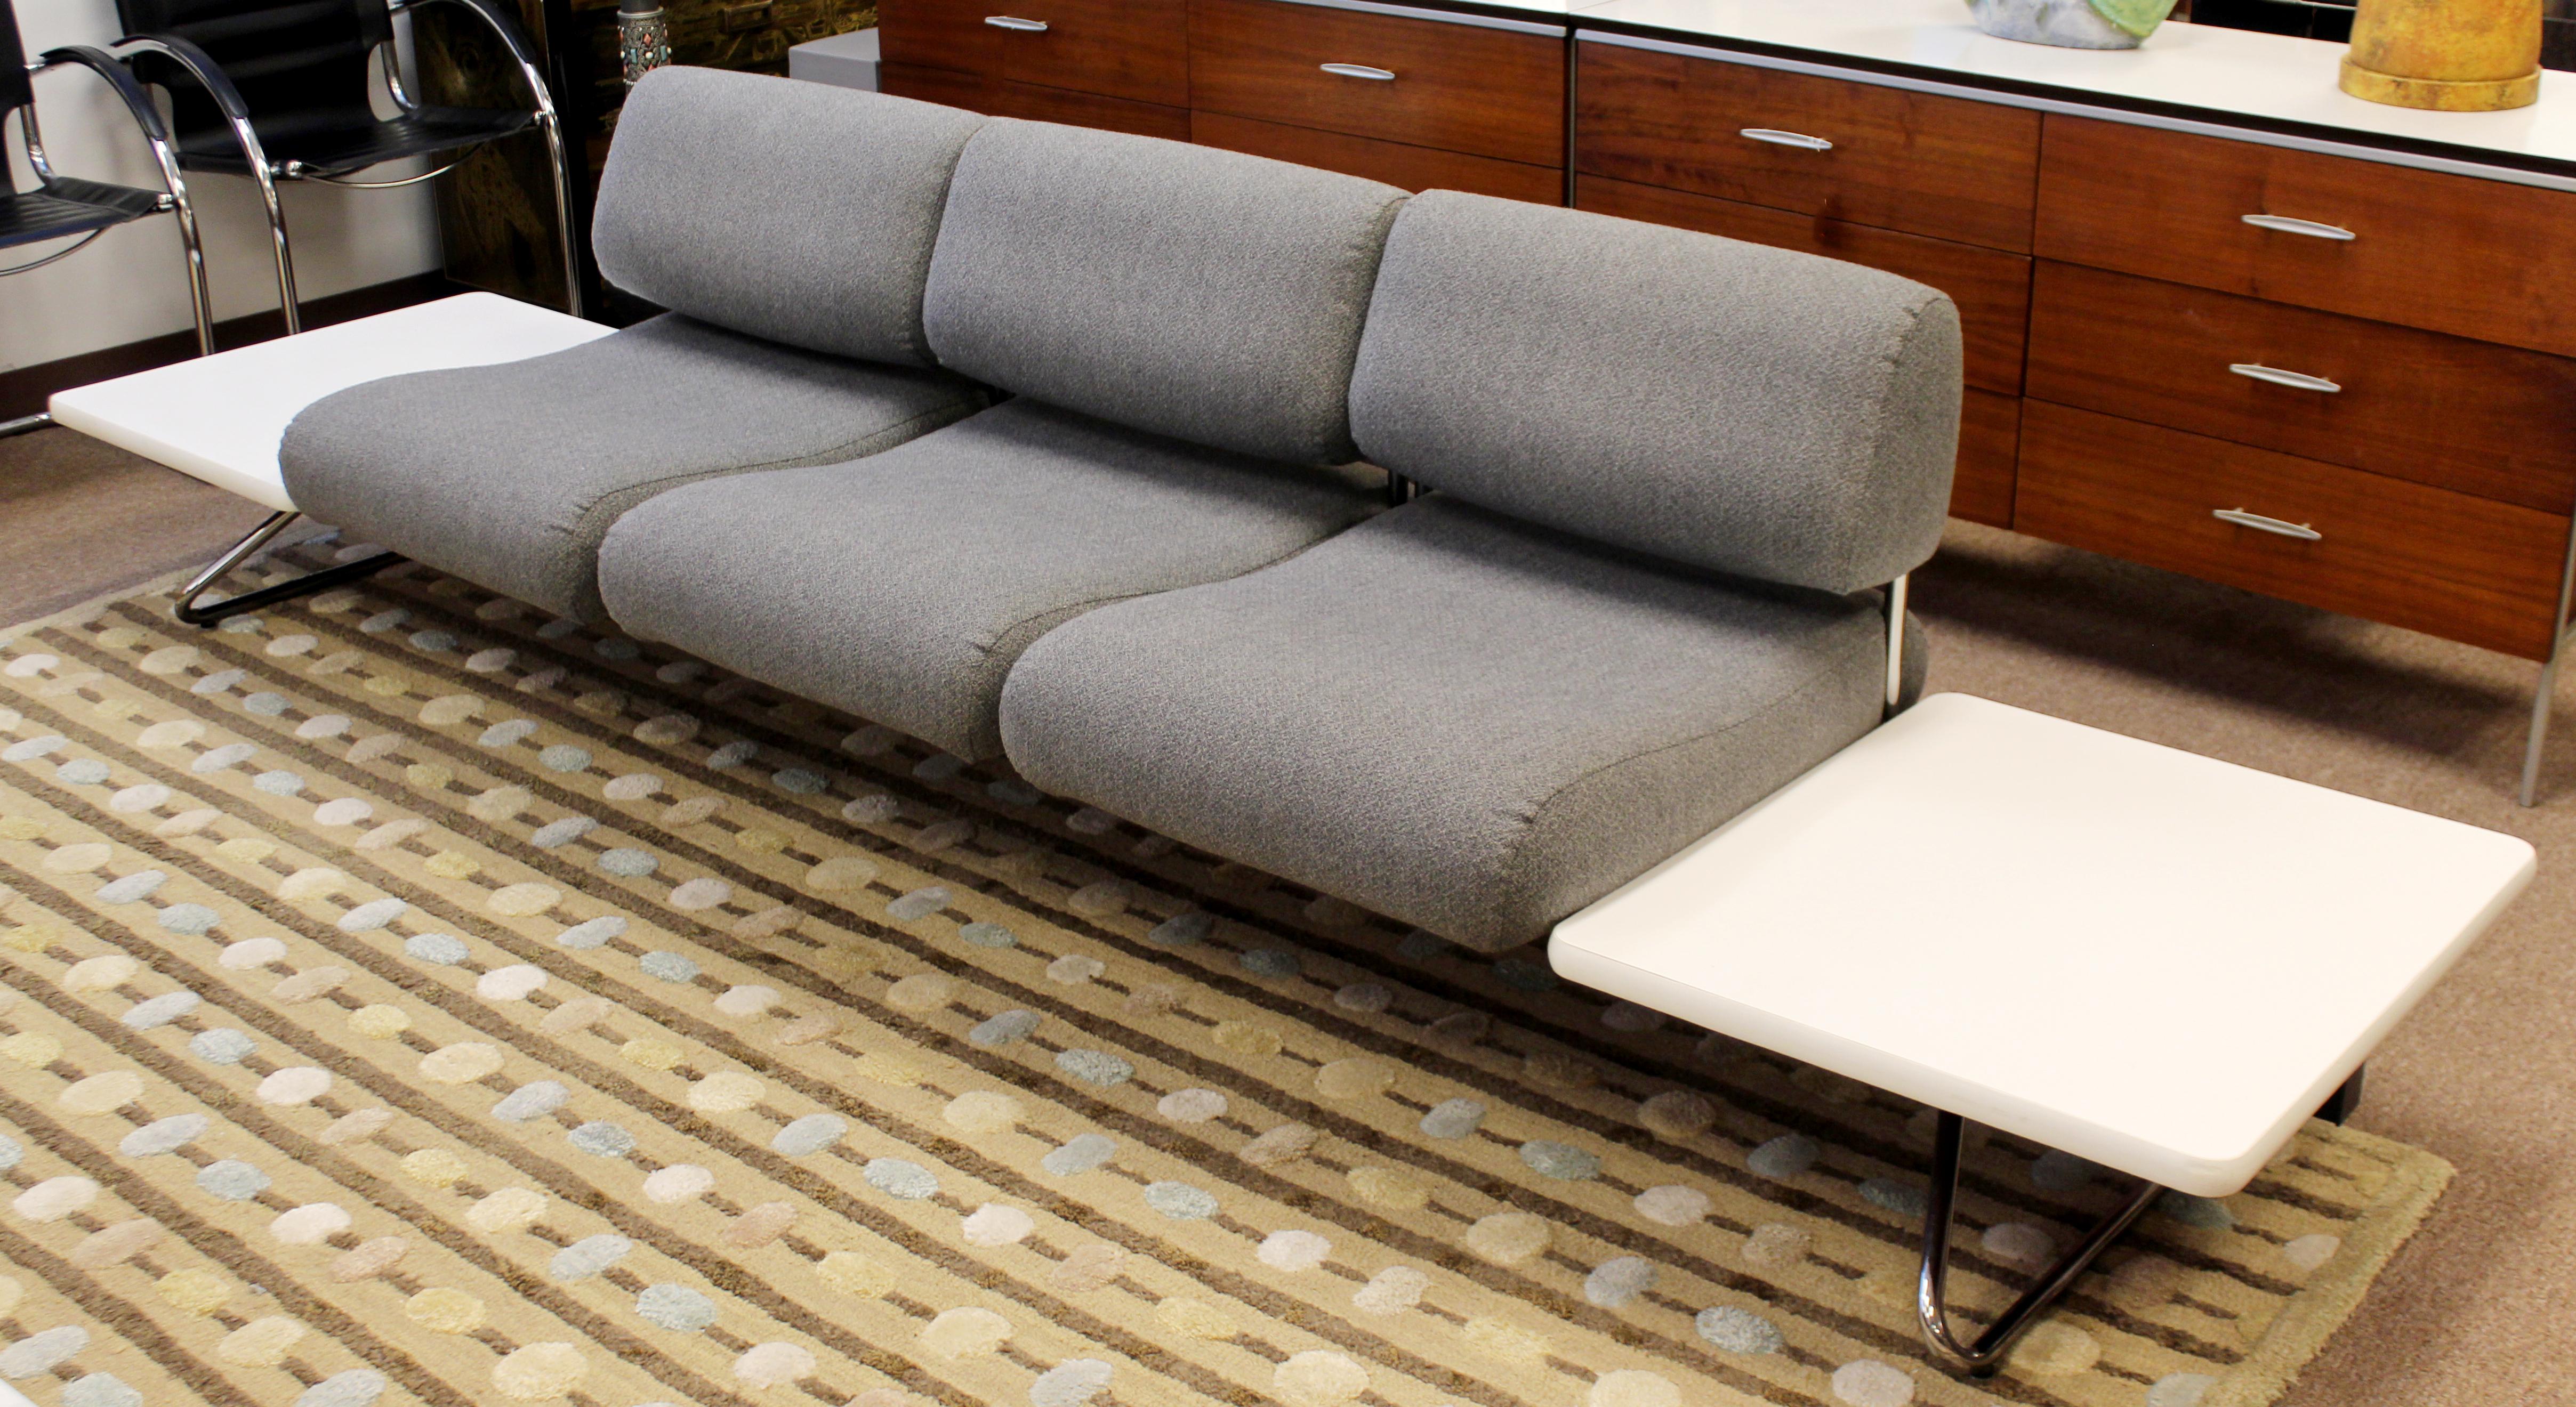 American Mid-Century Modern Chrome Gray Sofa with Built in Side Tables Nelson Miller Era